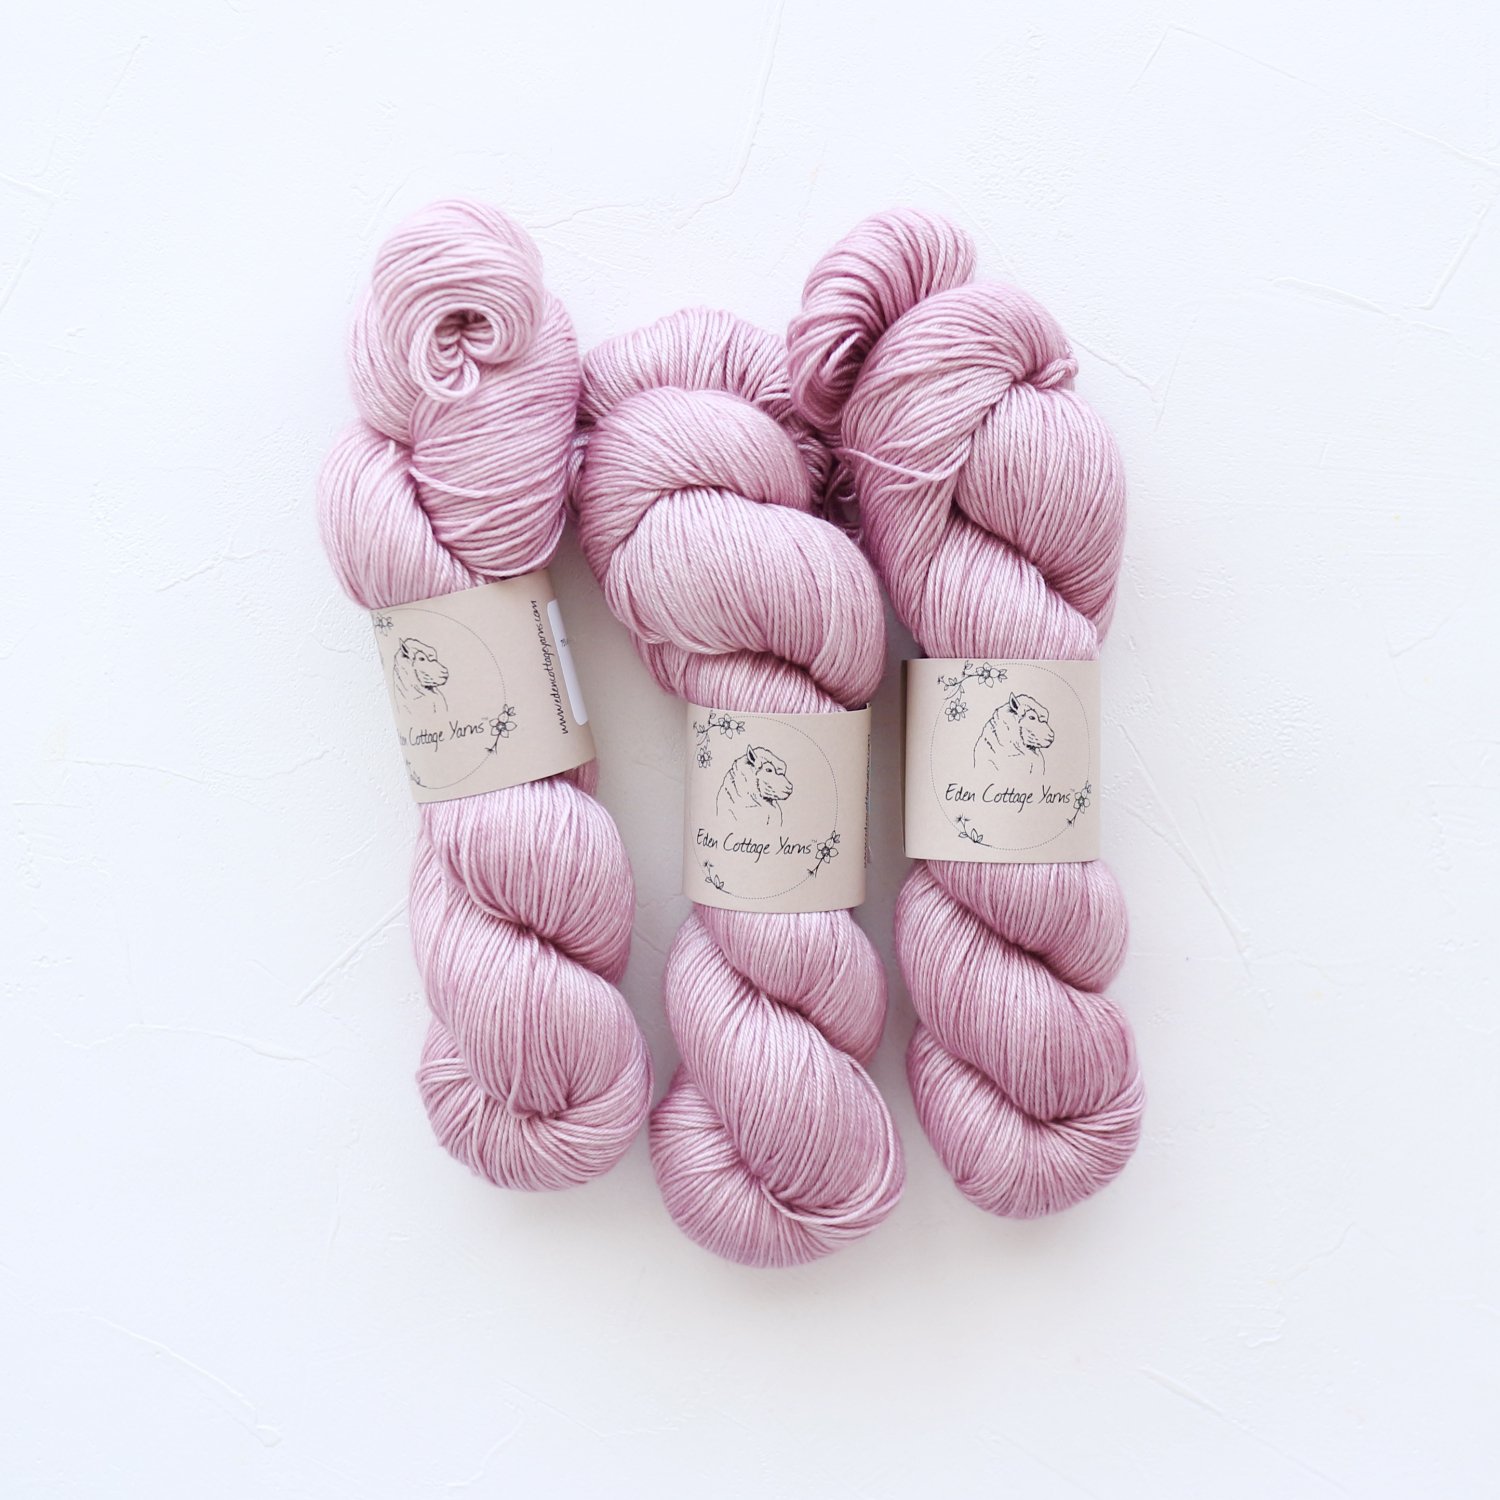 Eden Cottage Yarns<br>Titus 4ply<br>Meadow Rue